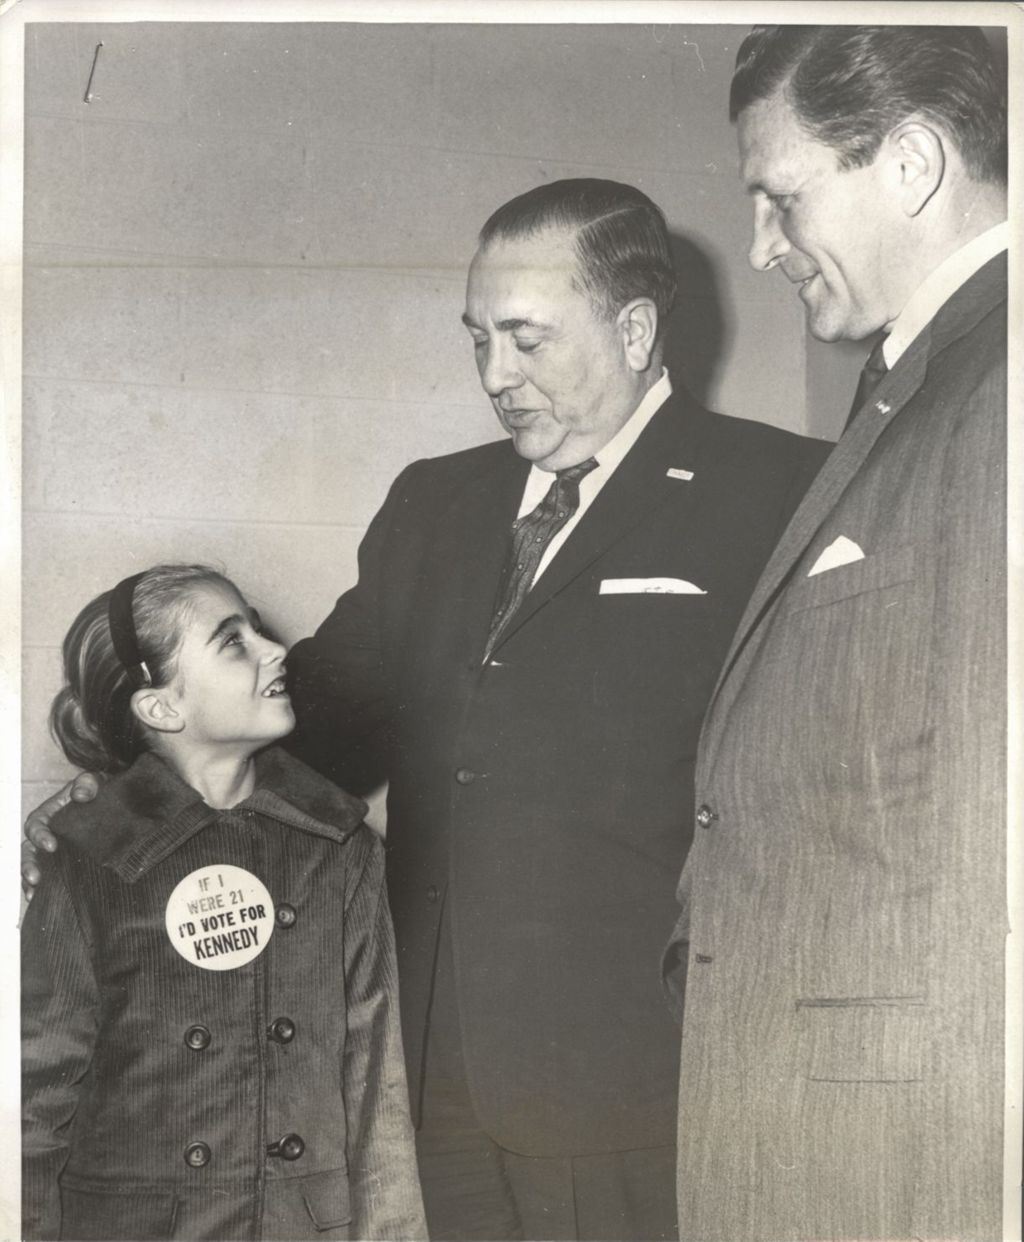 Miniature of Richard J. Daley with young girl wearing button supporting Kennedy